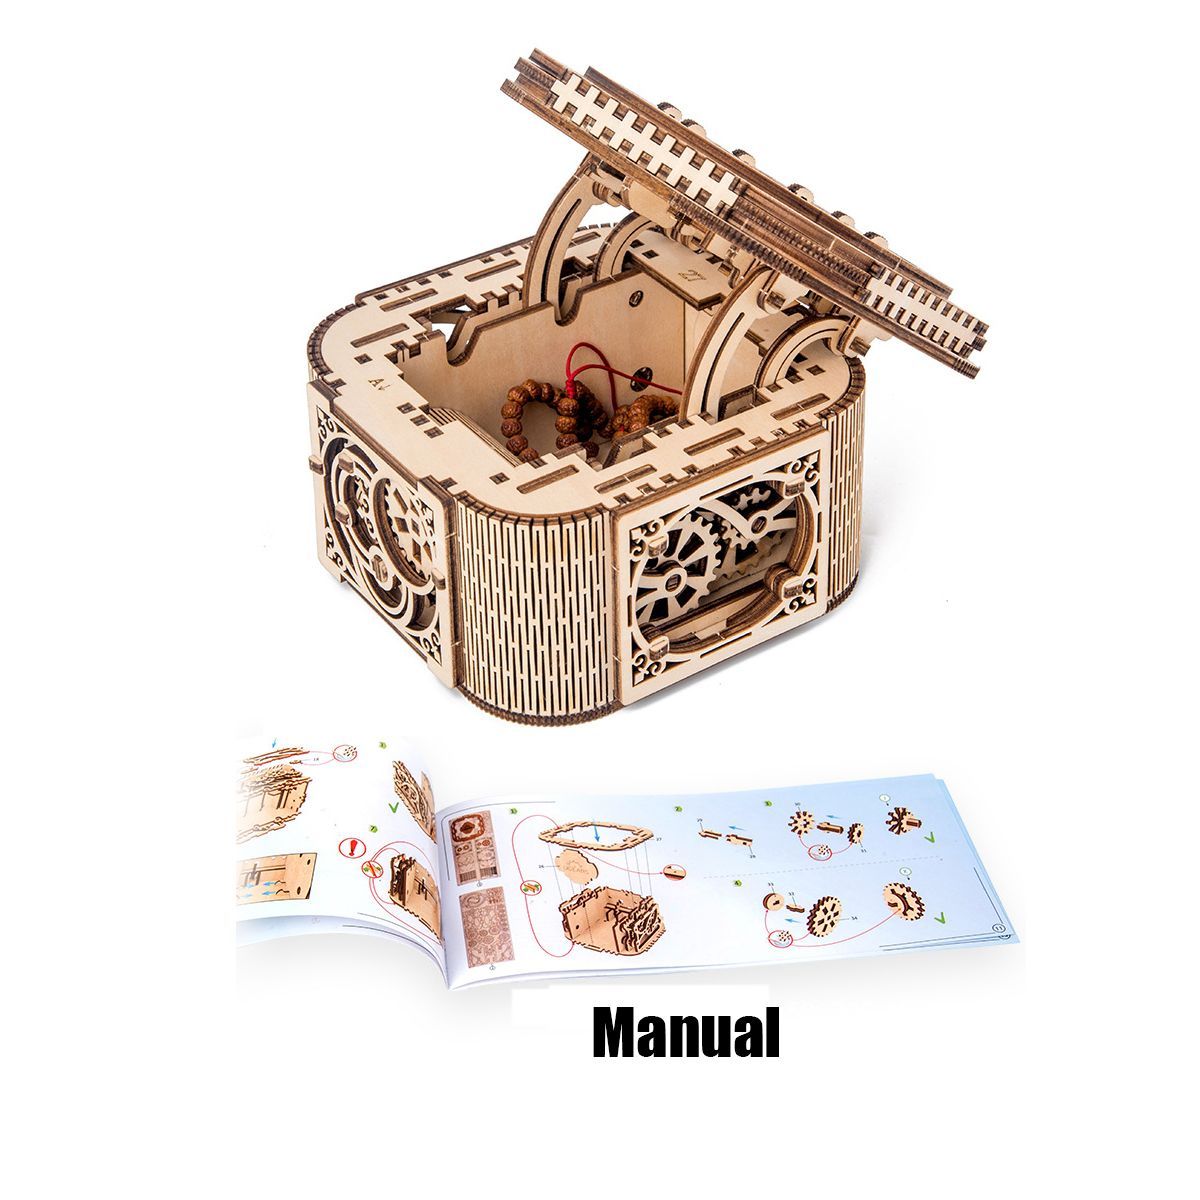 Wooden-Mechanical-Transmission-Jewelry-Box-DIY-Home-Office-Decor-1629122